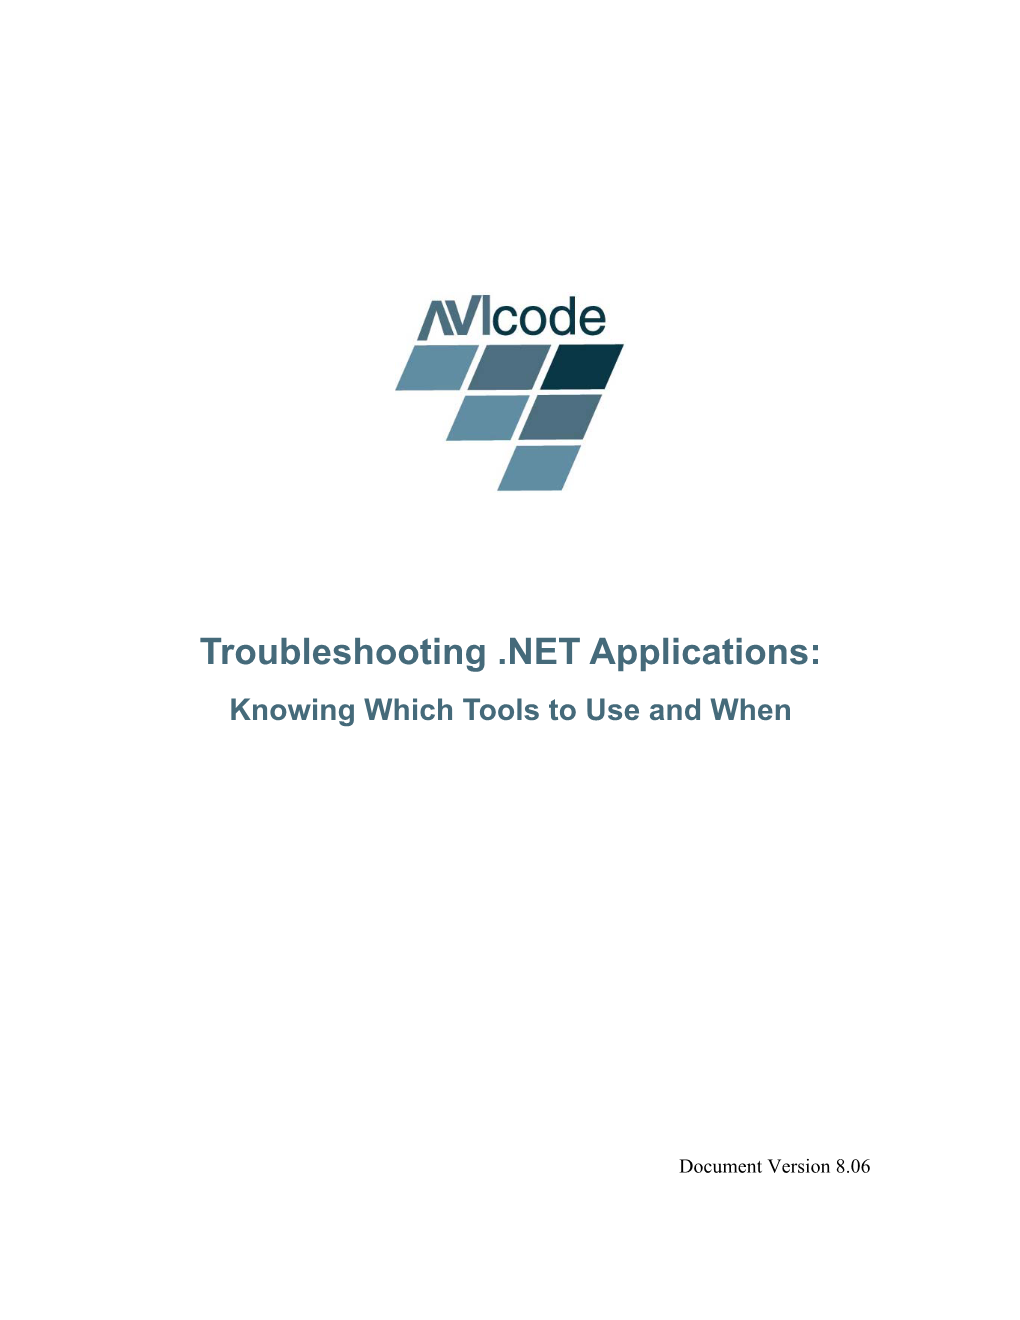 Troubleshooting .NET Applications: Knowing Which Tools to Use and When